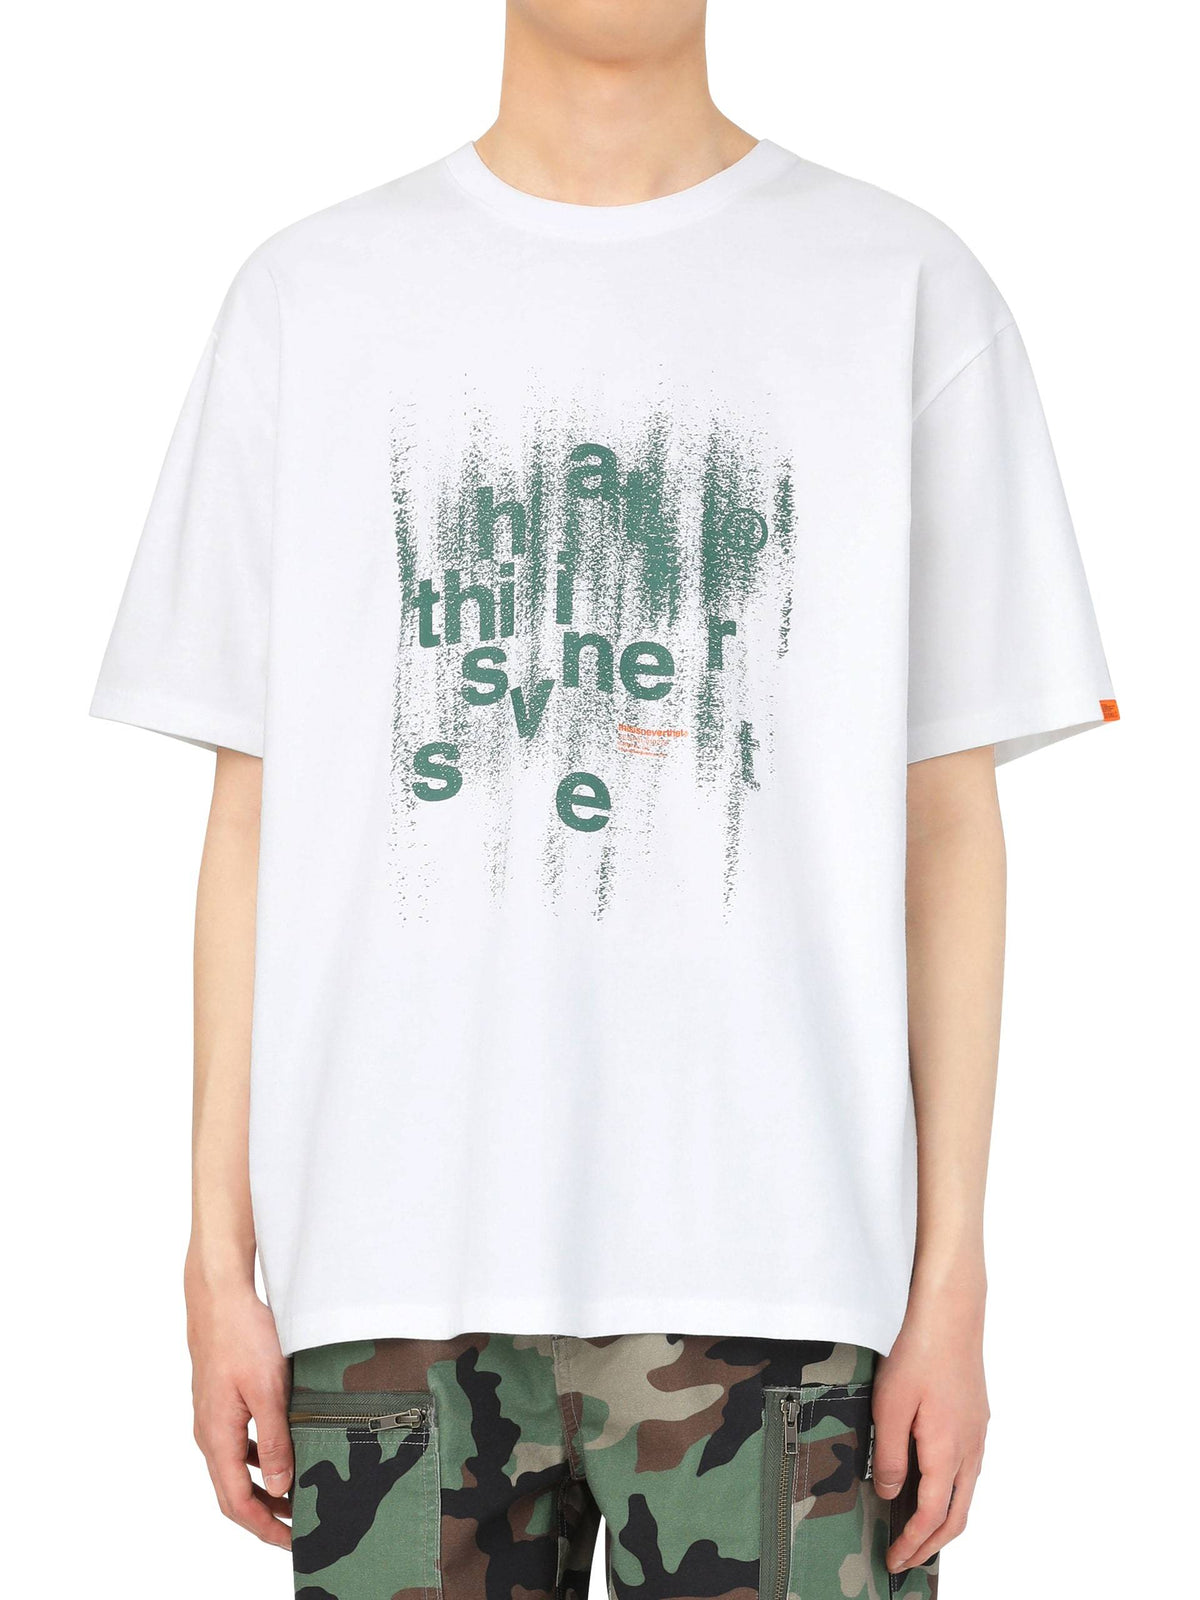 Brushed Paint Tee T-Shirt 